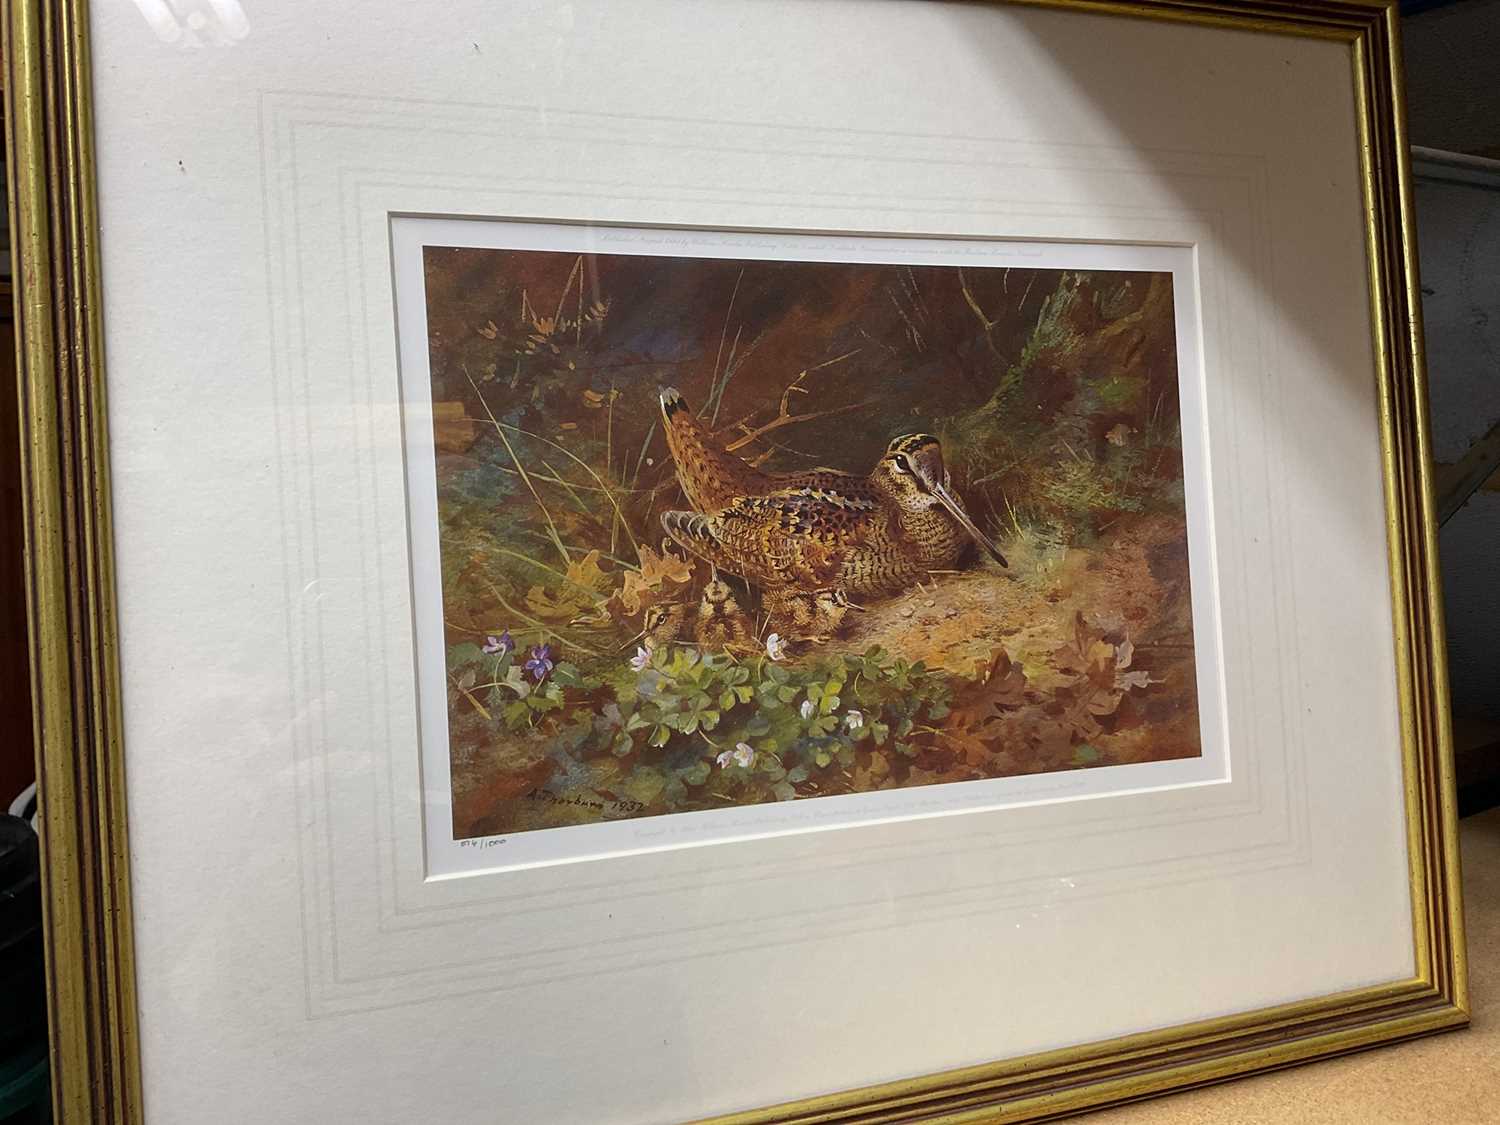 Set of four framed Archibald Thorburn prints, published by William Marler in editions of 1000 each - Image 5 of 5